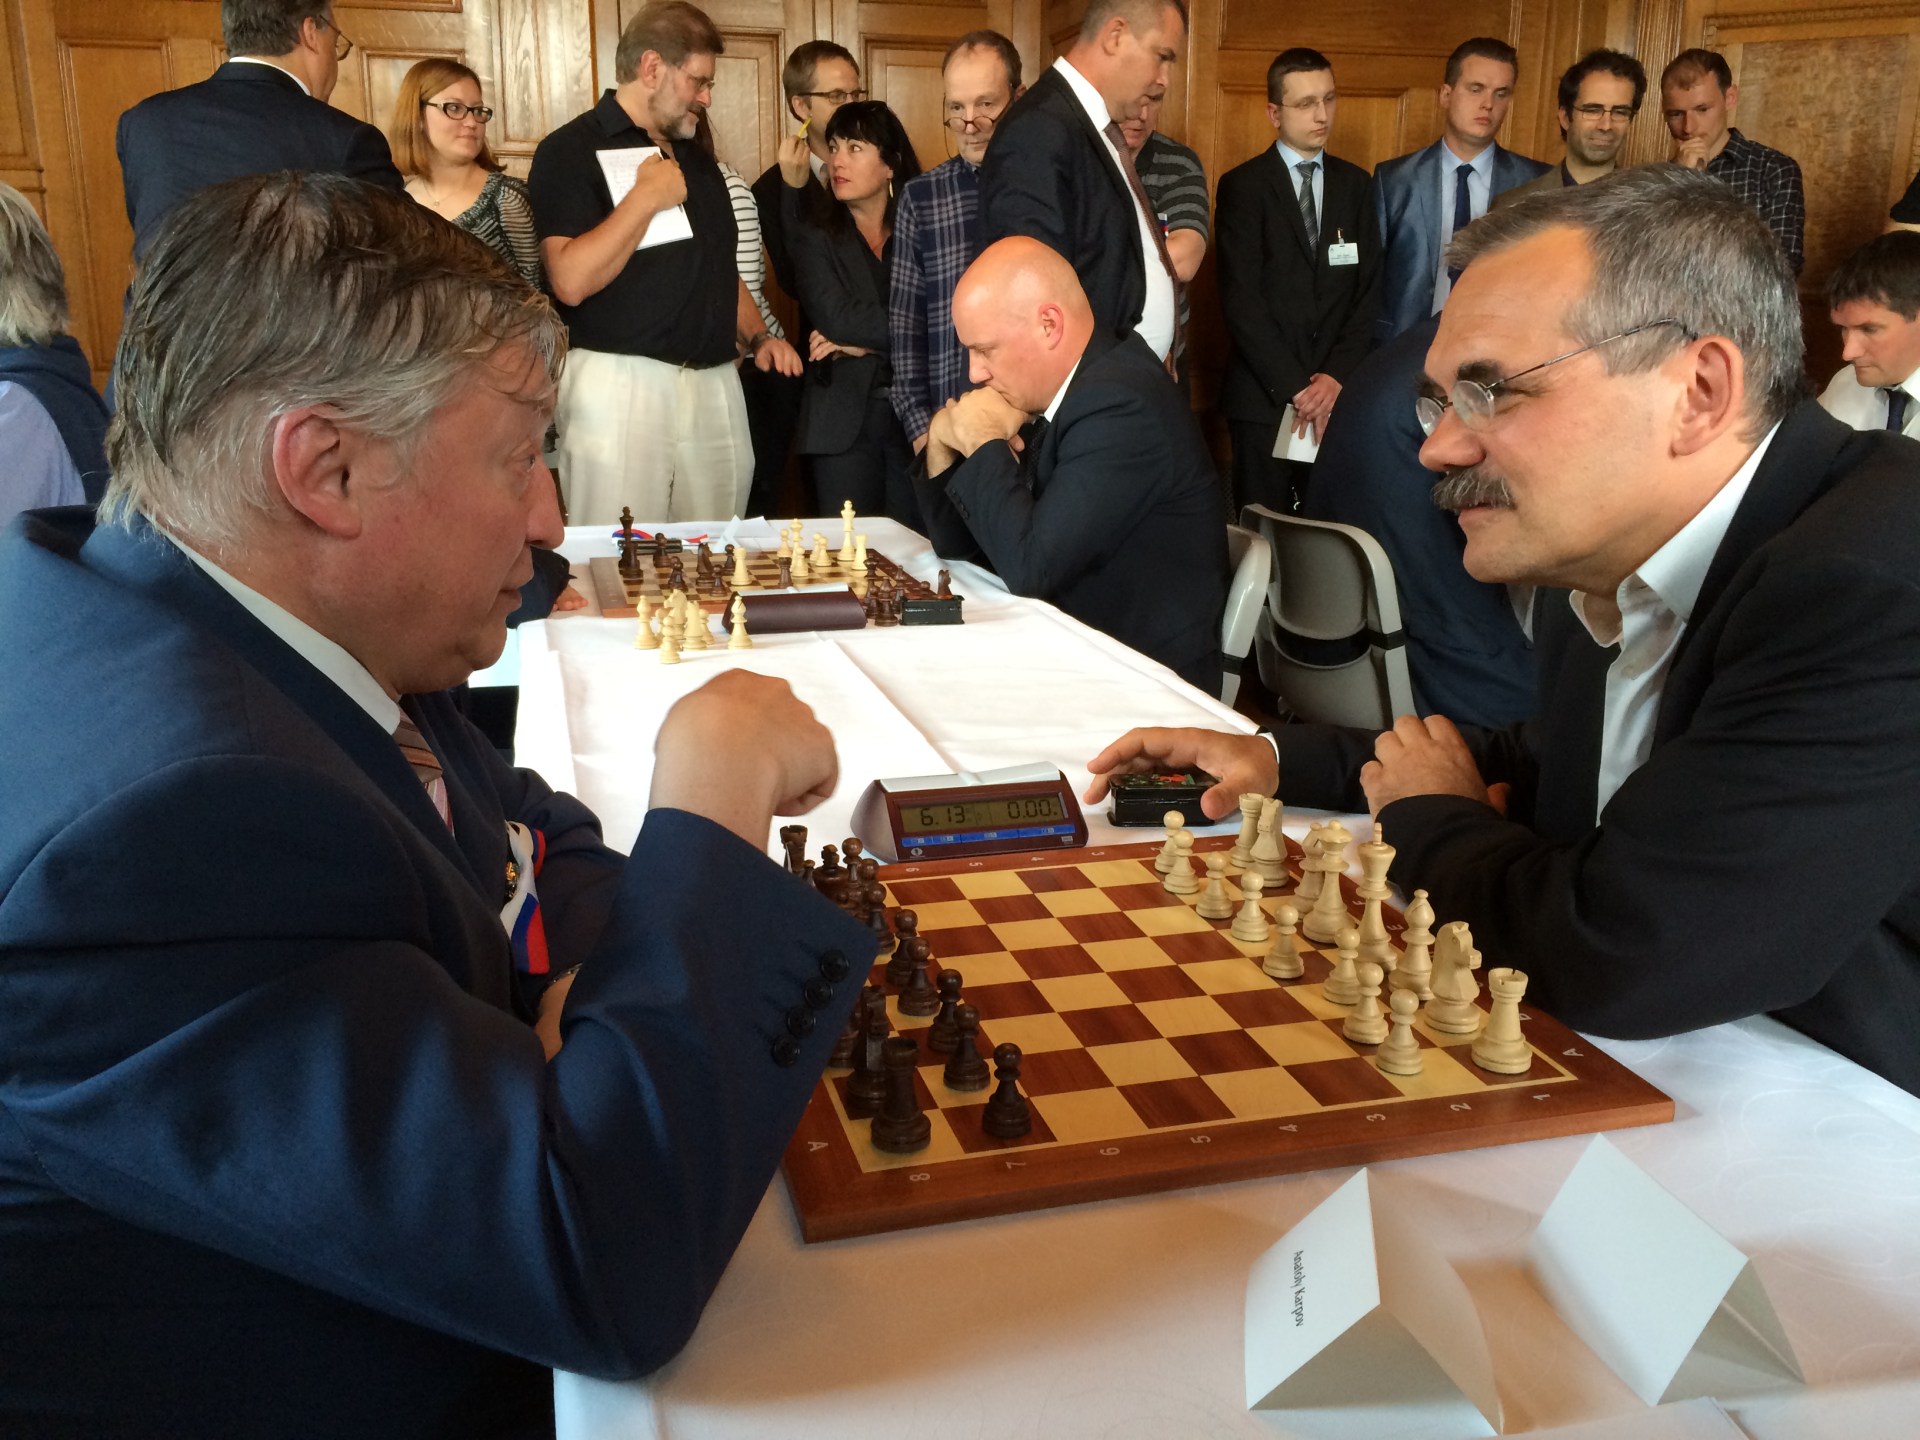 Swiss-Russian chess game prompts criticism - SWI